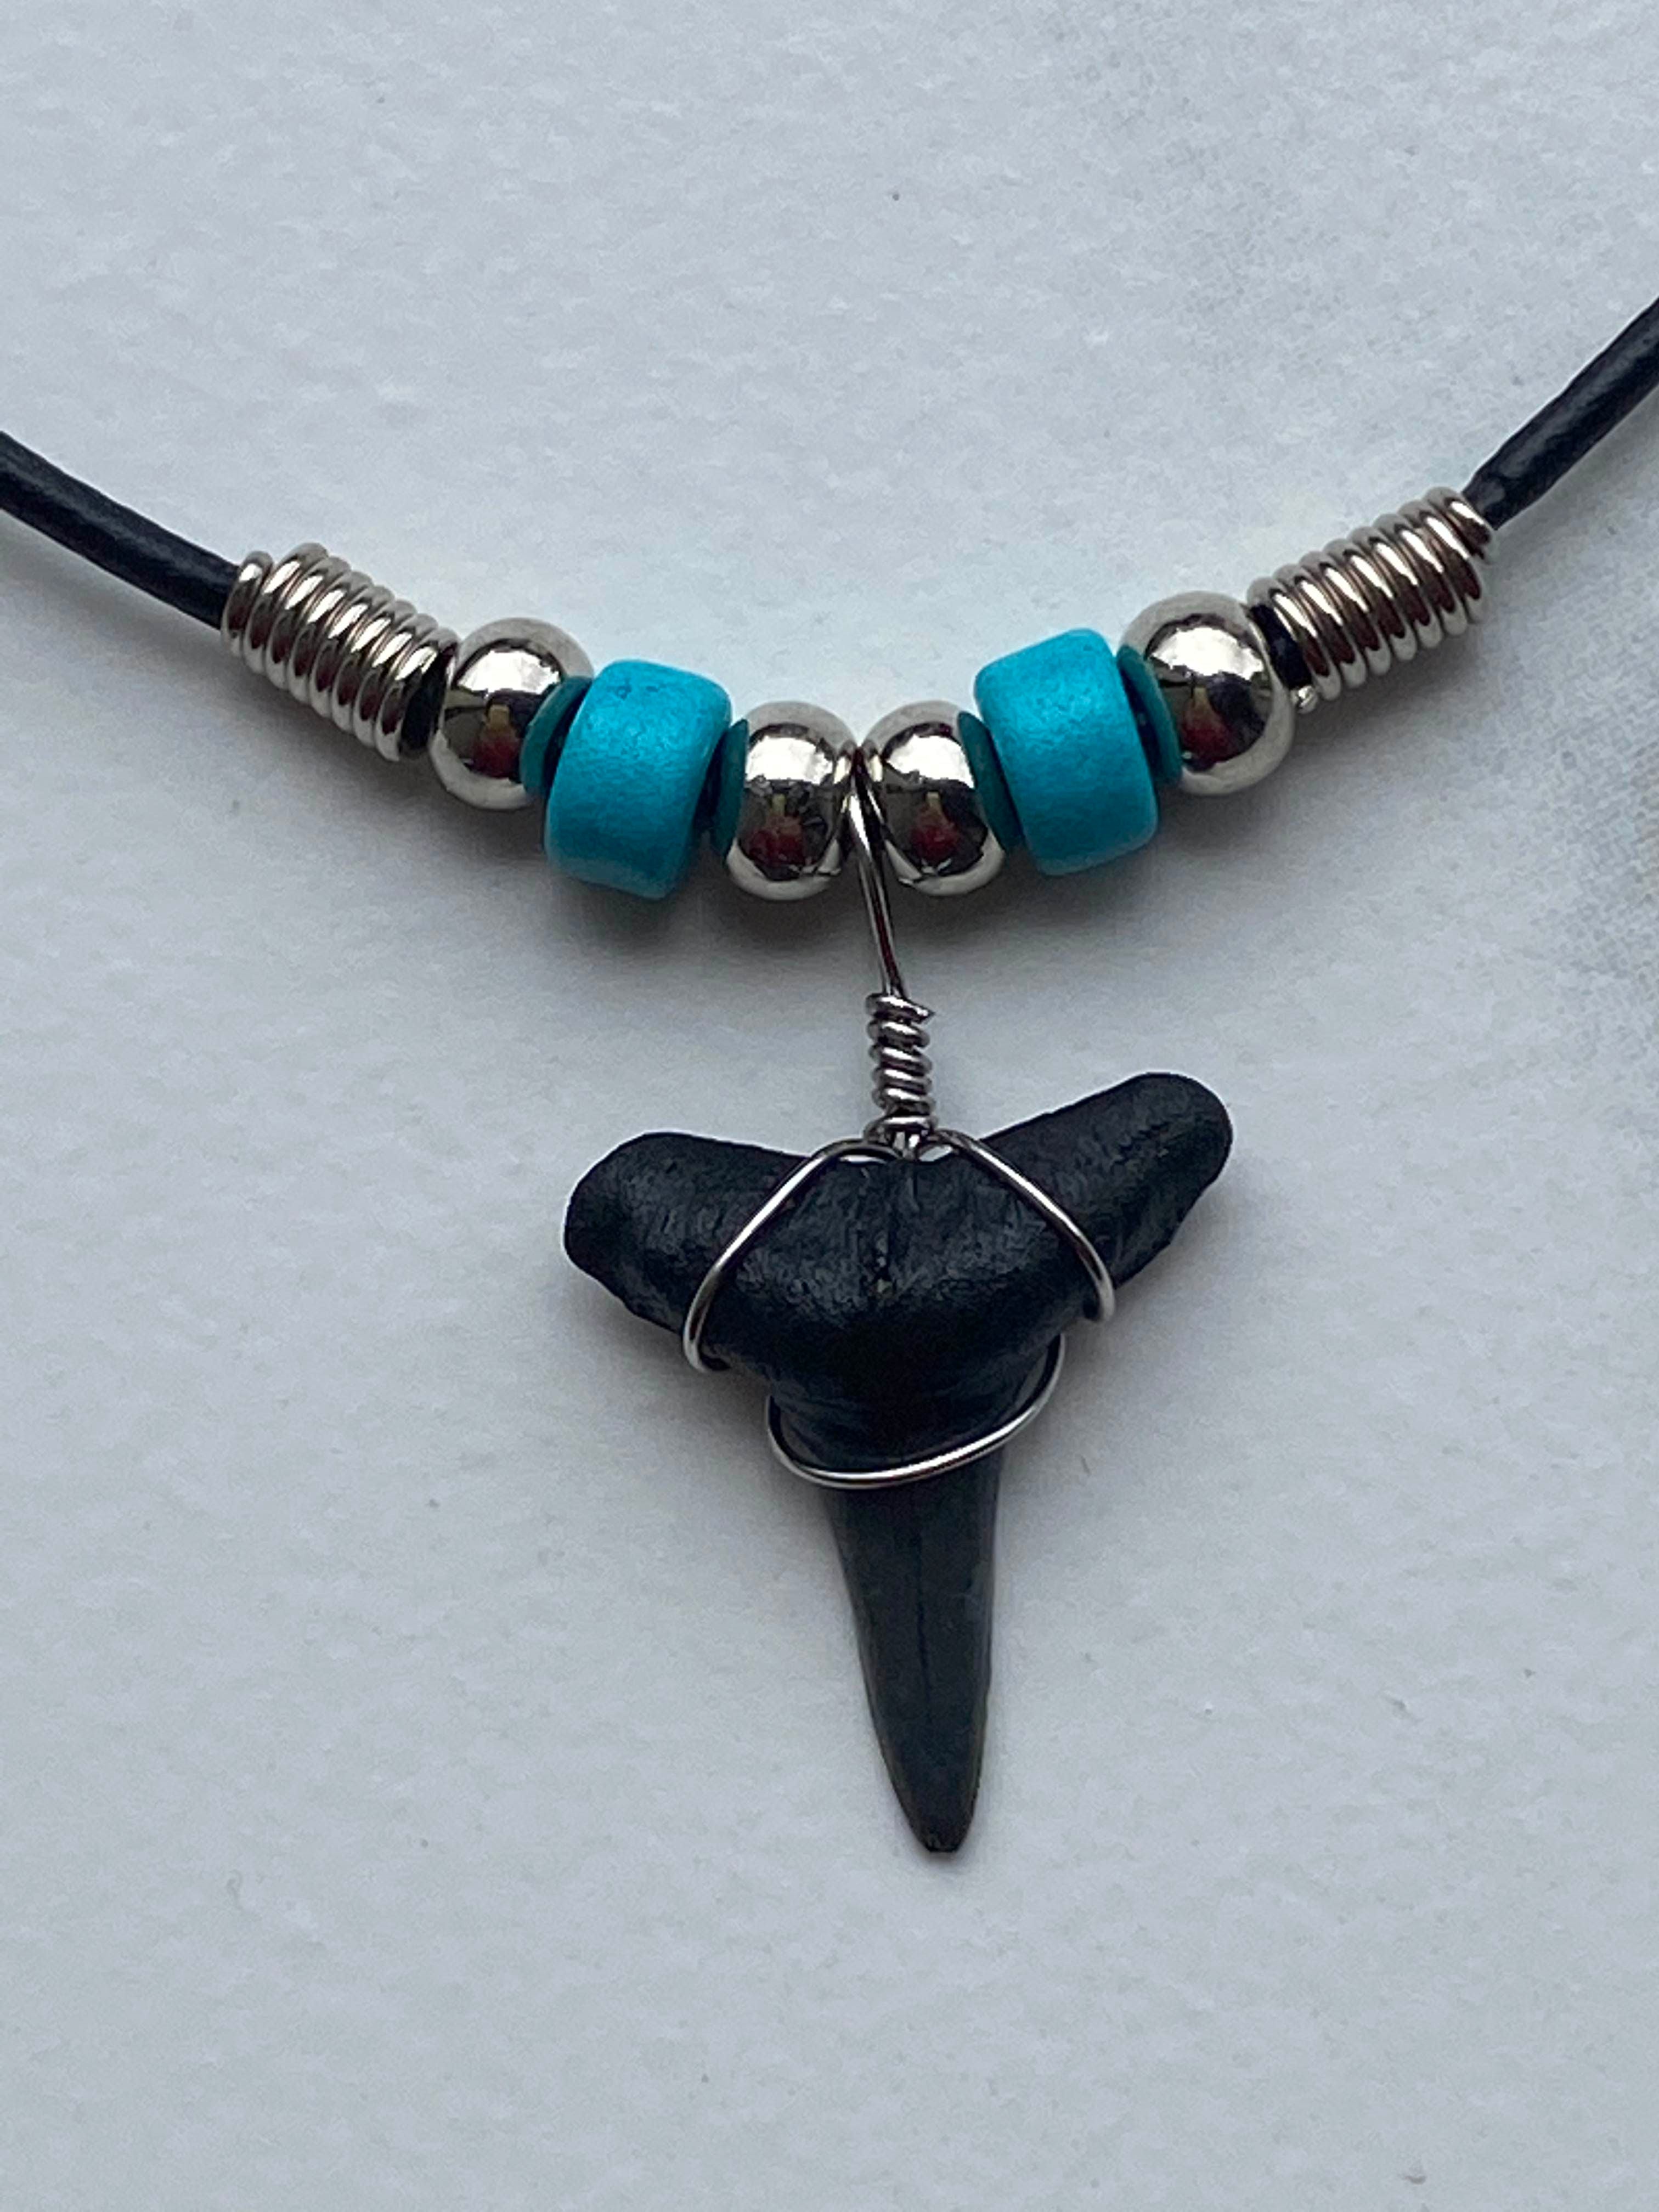 Fossil Hooked White Shark Tooth Necklace - Bakersfield, California  (#240678) For Sale - FossilEra.com